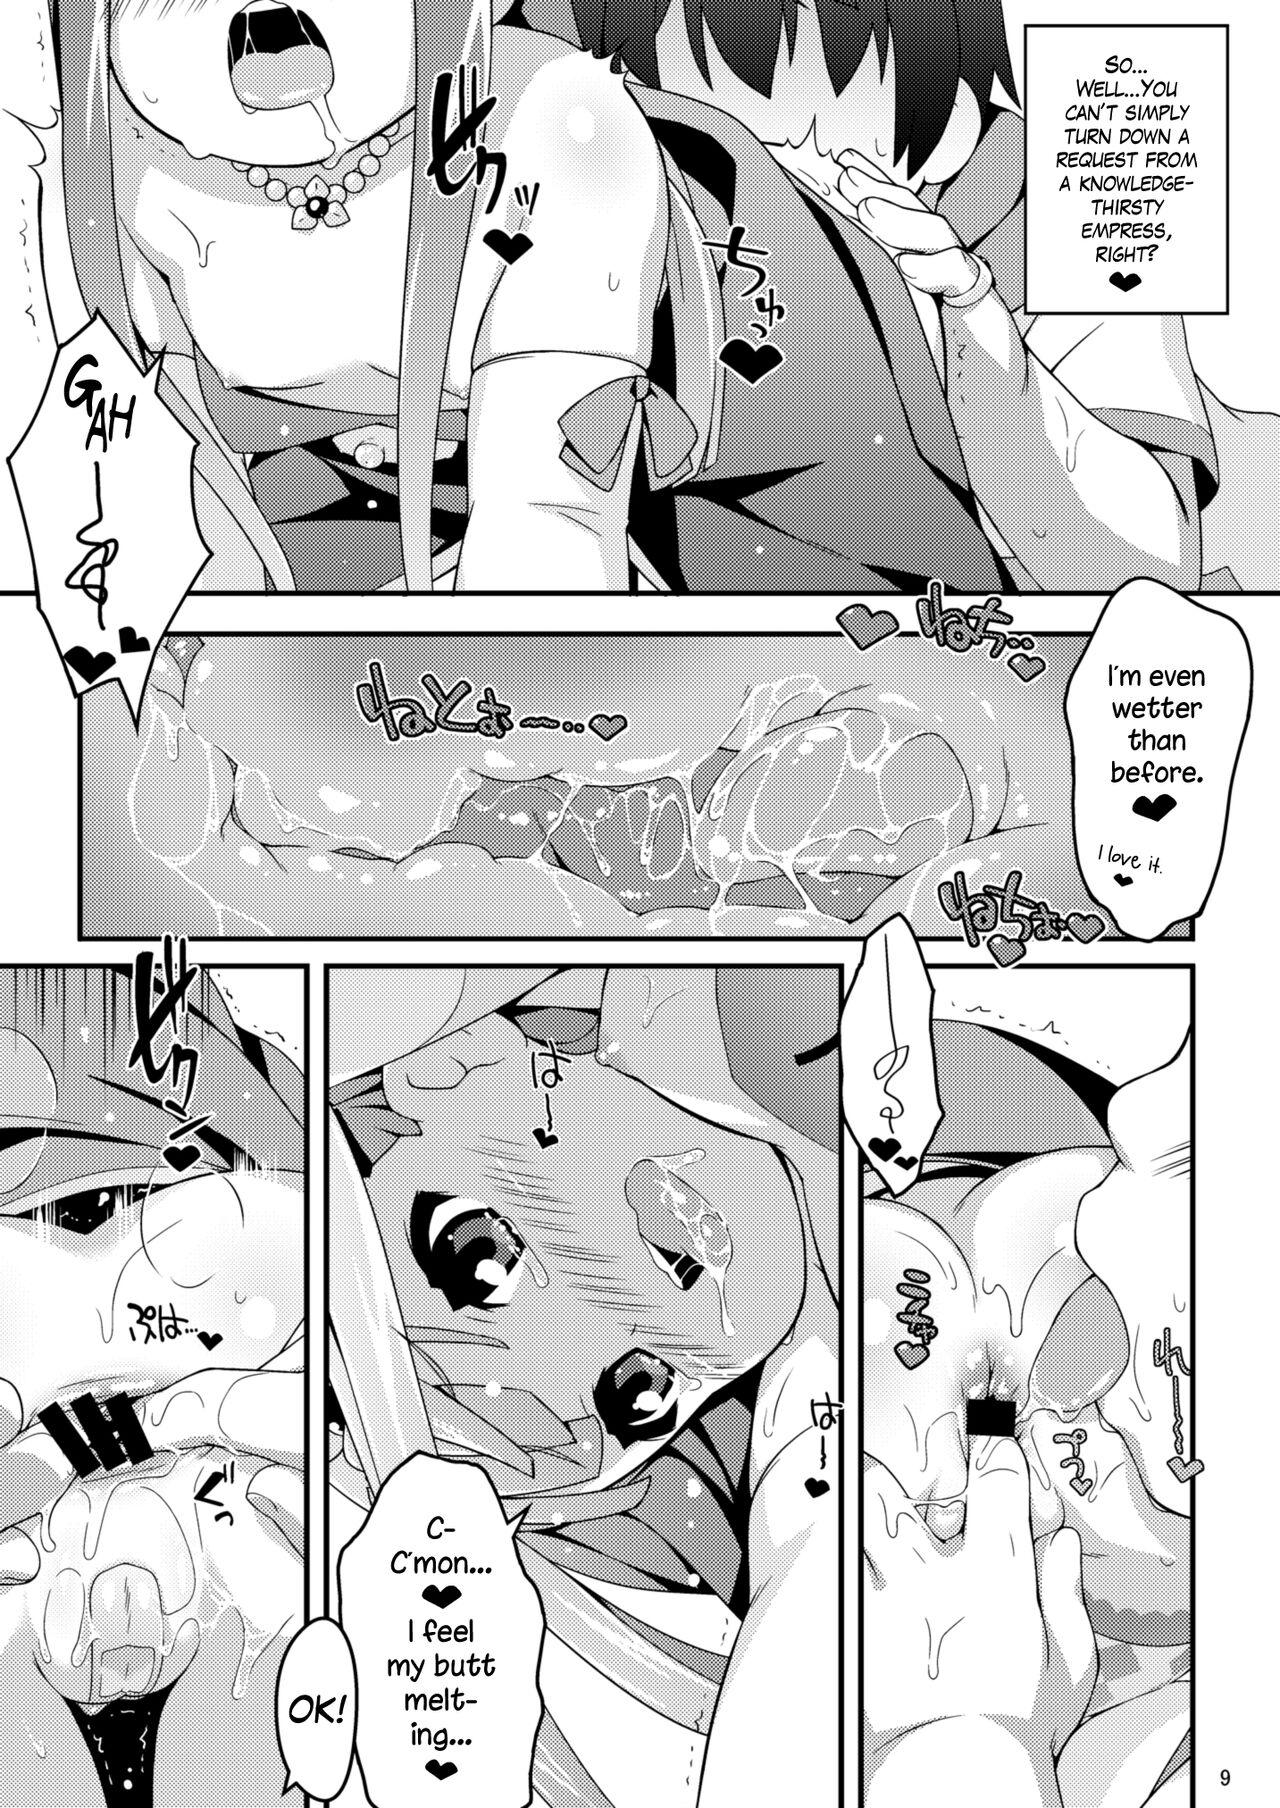 Swallow Petralka to Anal Company | PetralkAnal Company - Outbreak company College - Page 8